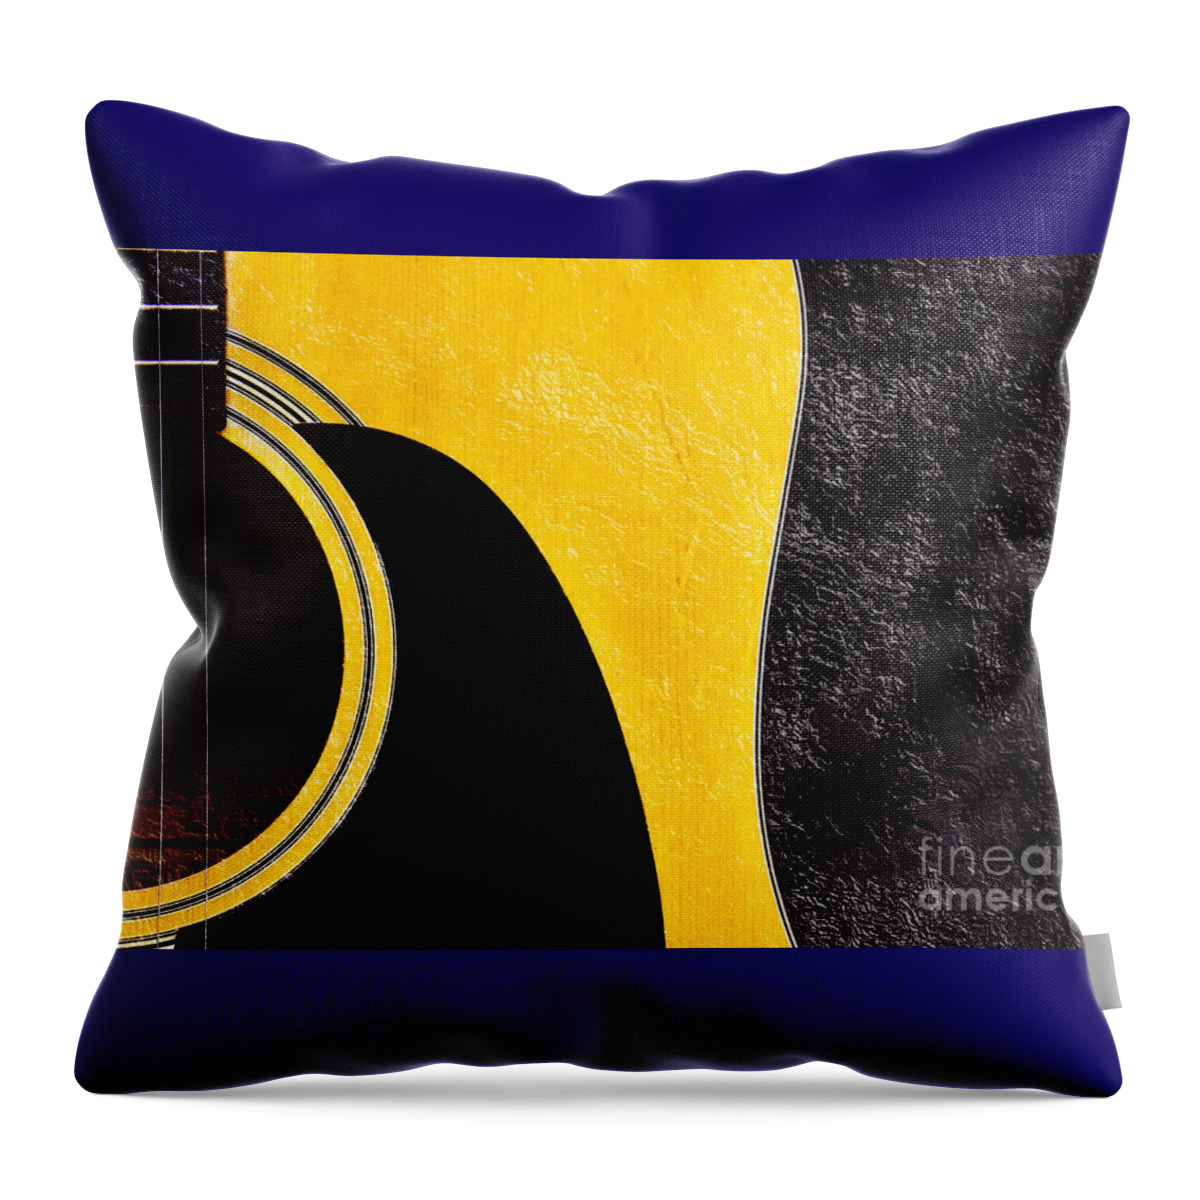 Guitar Throw Pillow featuring the photograph Hour Glass Guitar 4 Colors 1 - Tetraptych - Yellow Corner - Music - Abstract by Andee Design